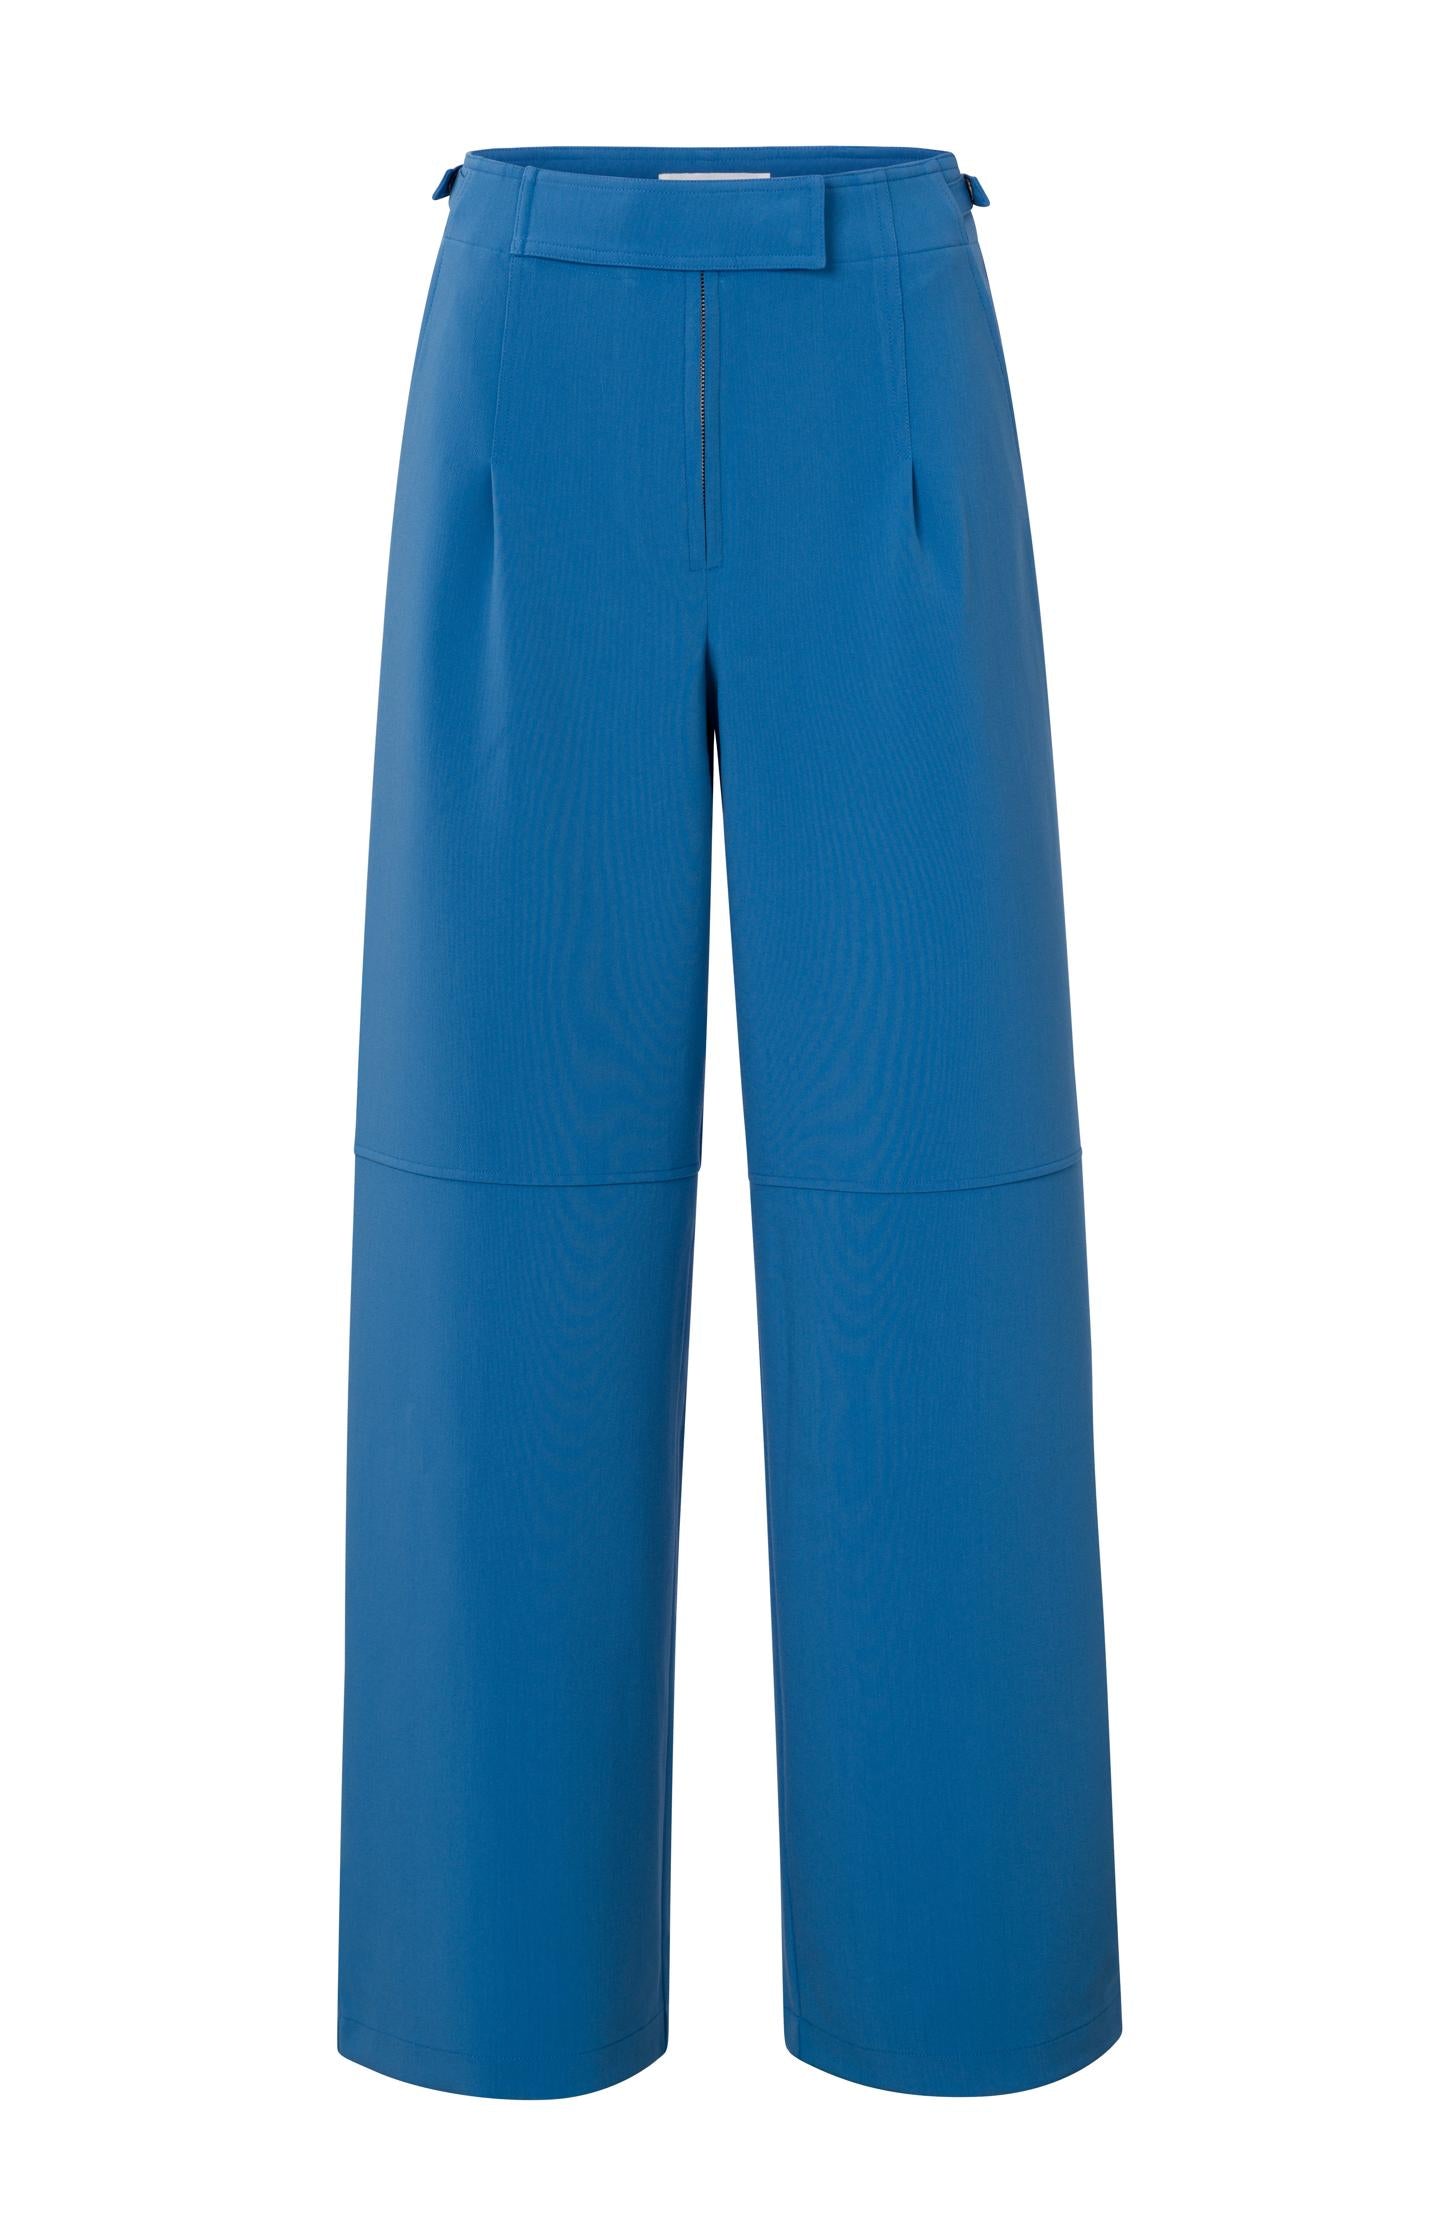 High waist trouser with wide leg, side pockets and zip - Type: product